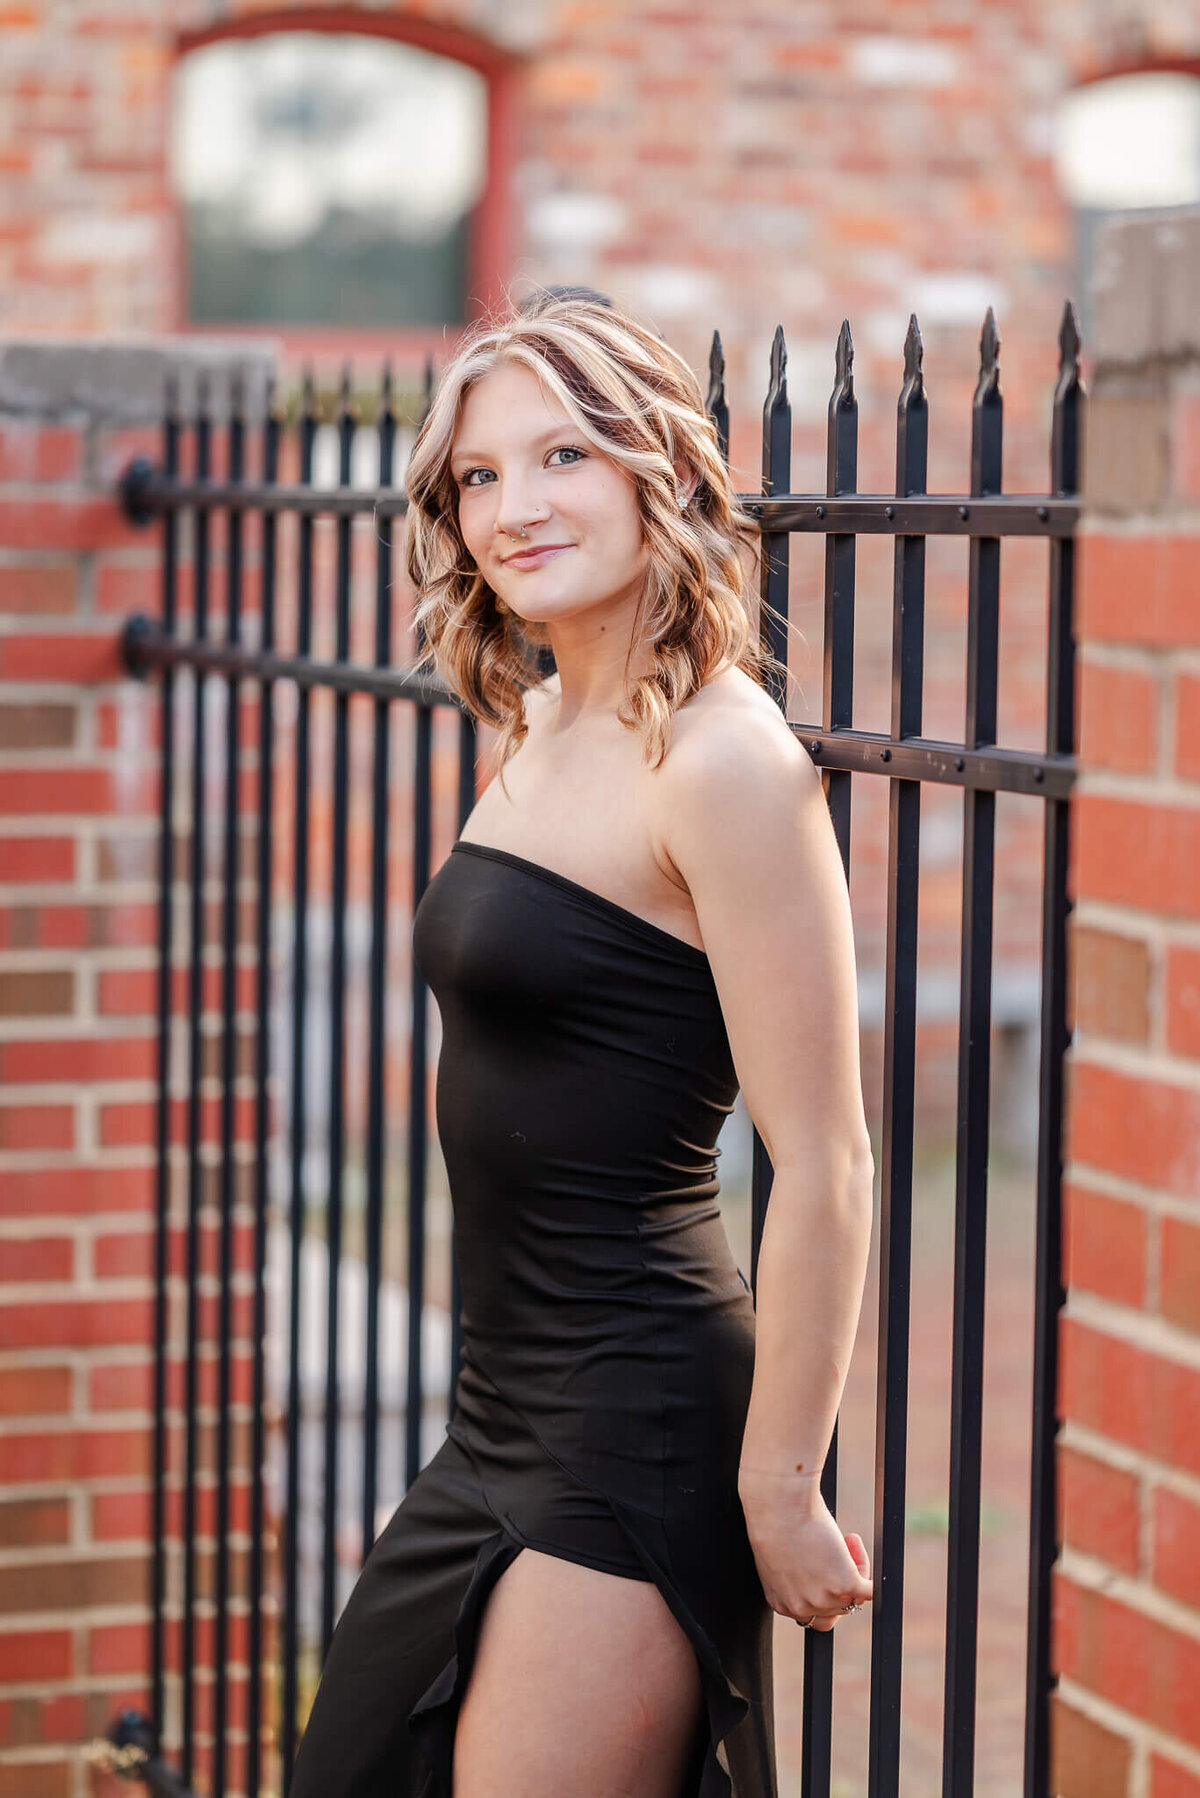 A high school senior, wearing a black dress with a slit, leans on a wire fence in a brick wall. She is having her senior session with Chesapeake senior photographer, Justine Renee Photography.